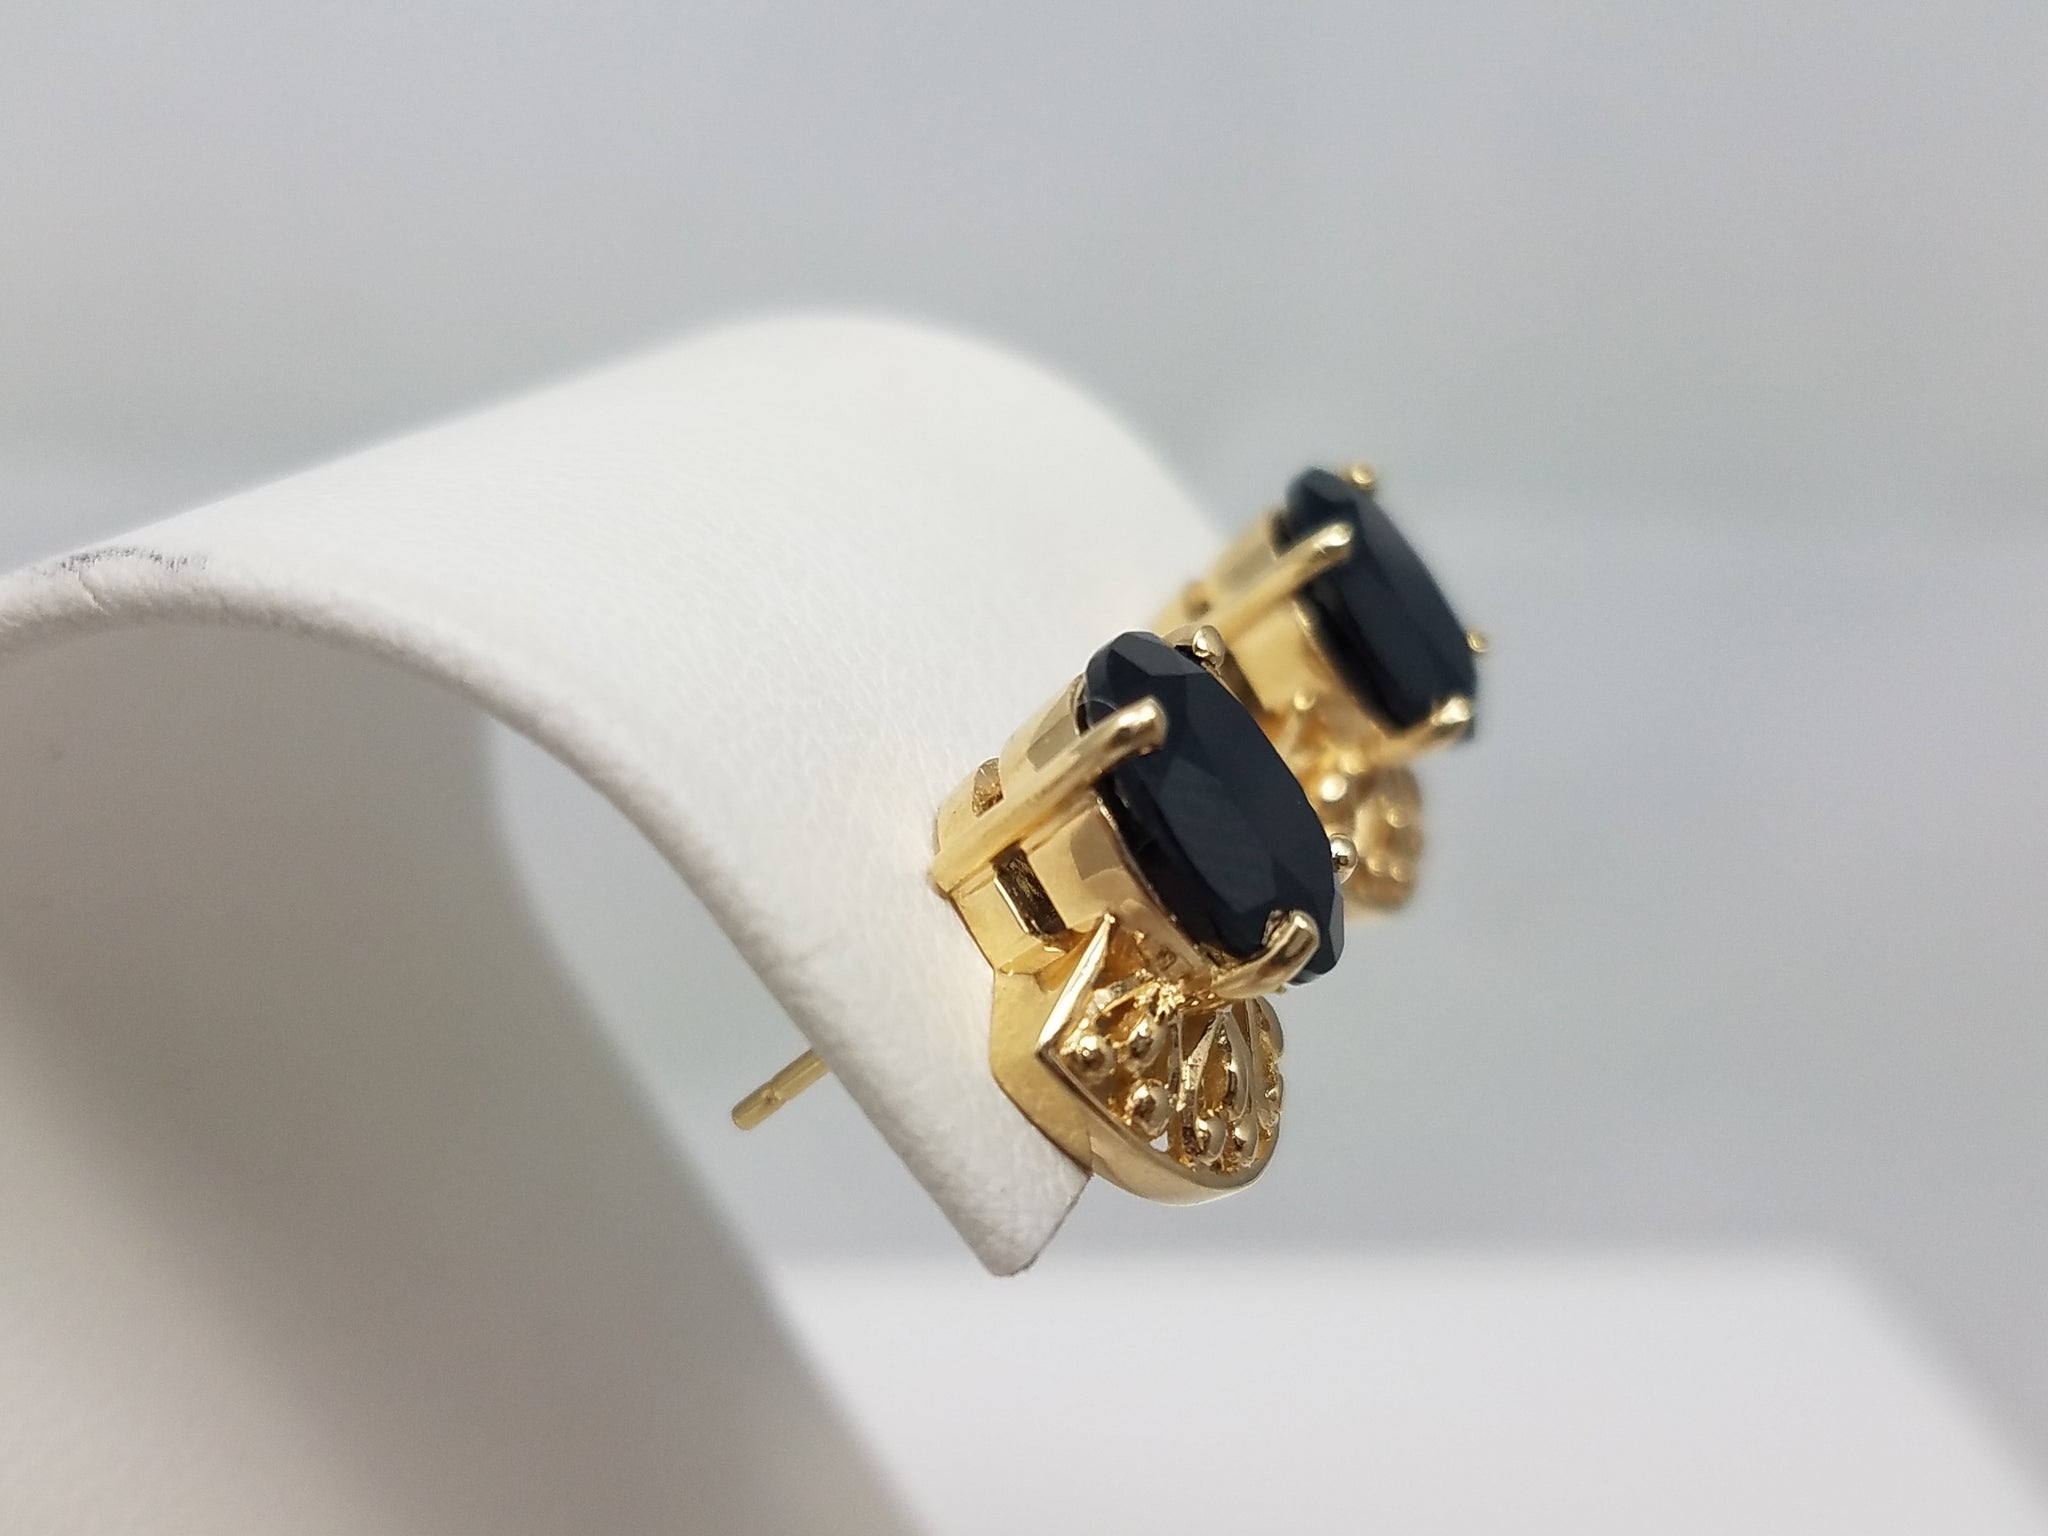 New! 10k Yellow Gold Faceted Onyx Earrings